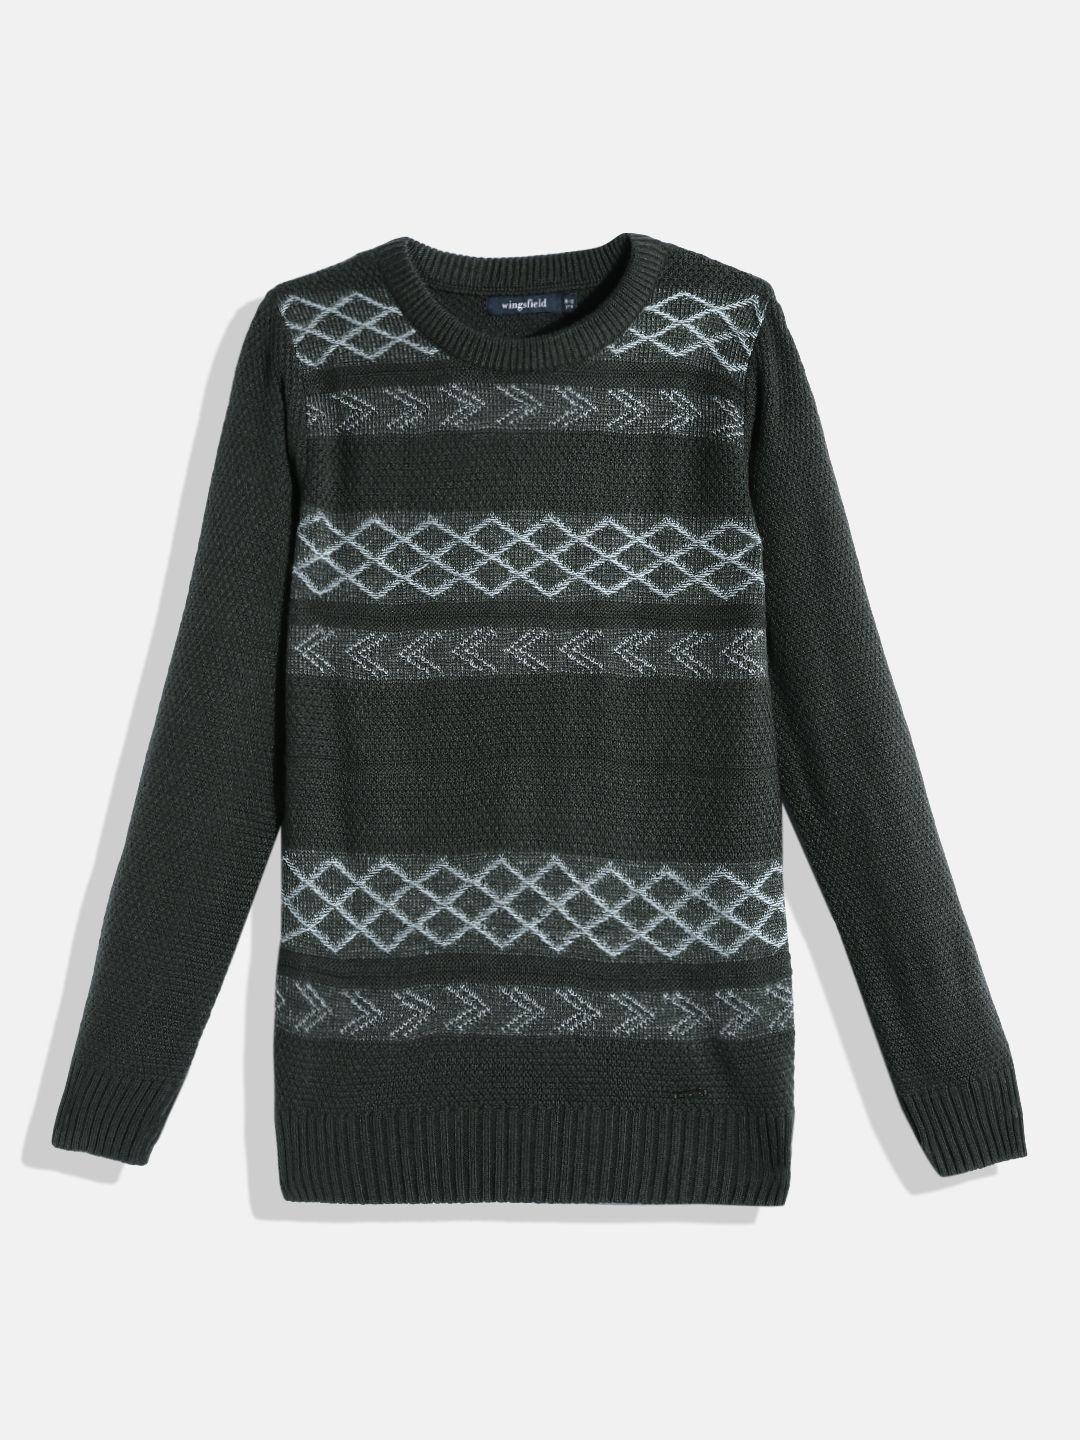 wingsfield boys charcoal grey & white self design acrylic pullover